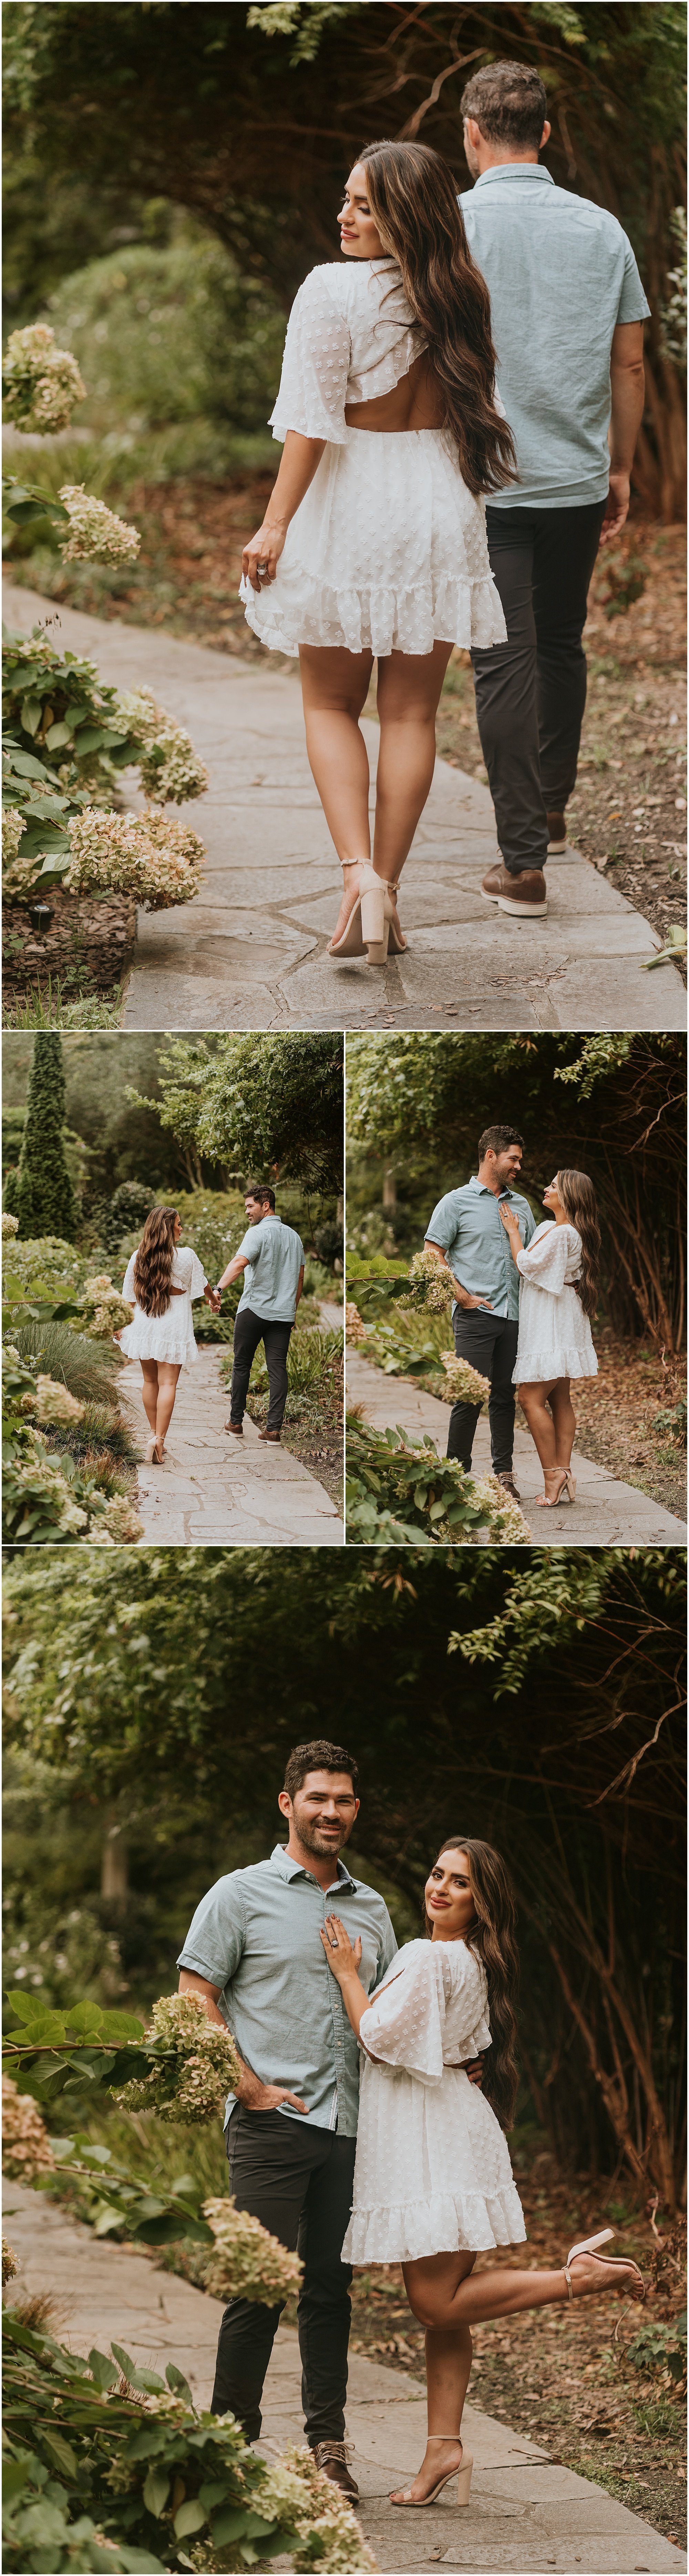 Cator Woolord Gardens_engagement_0125.jpg